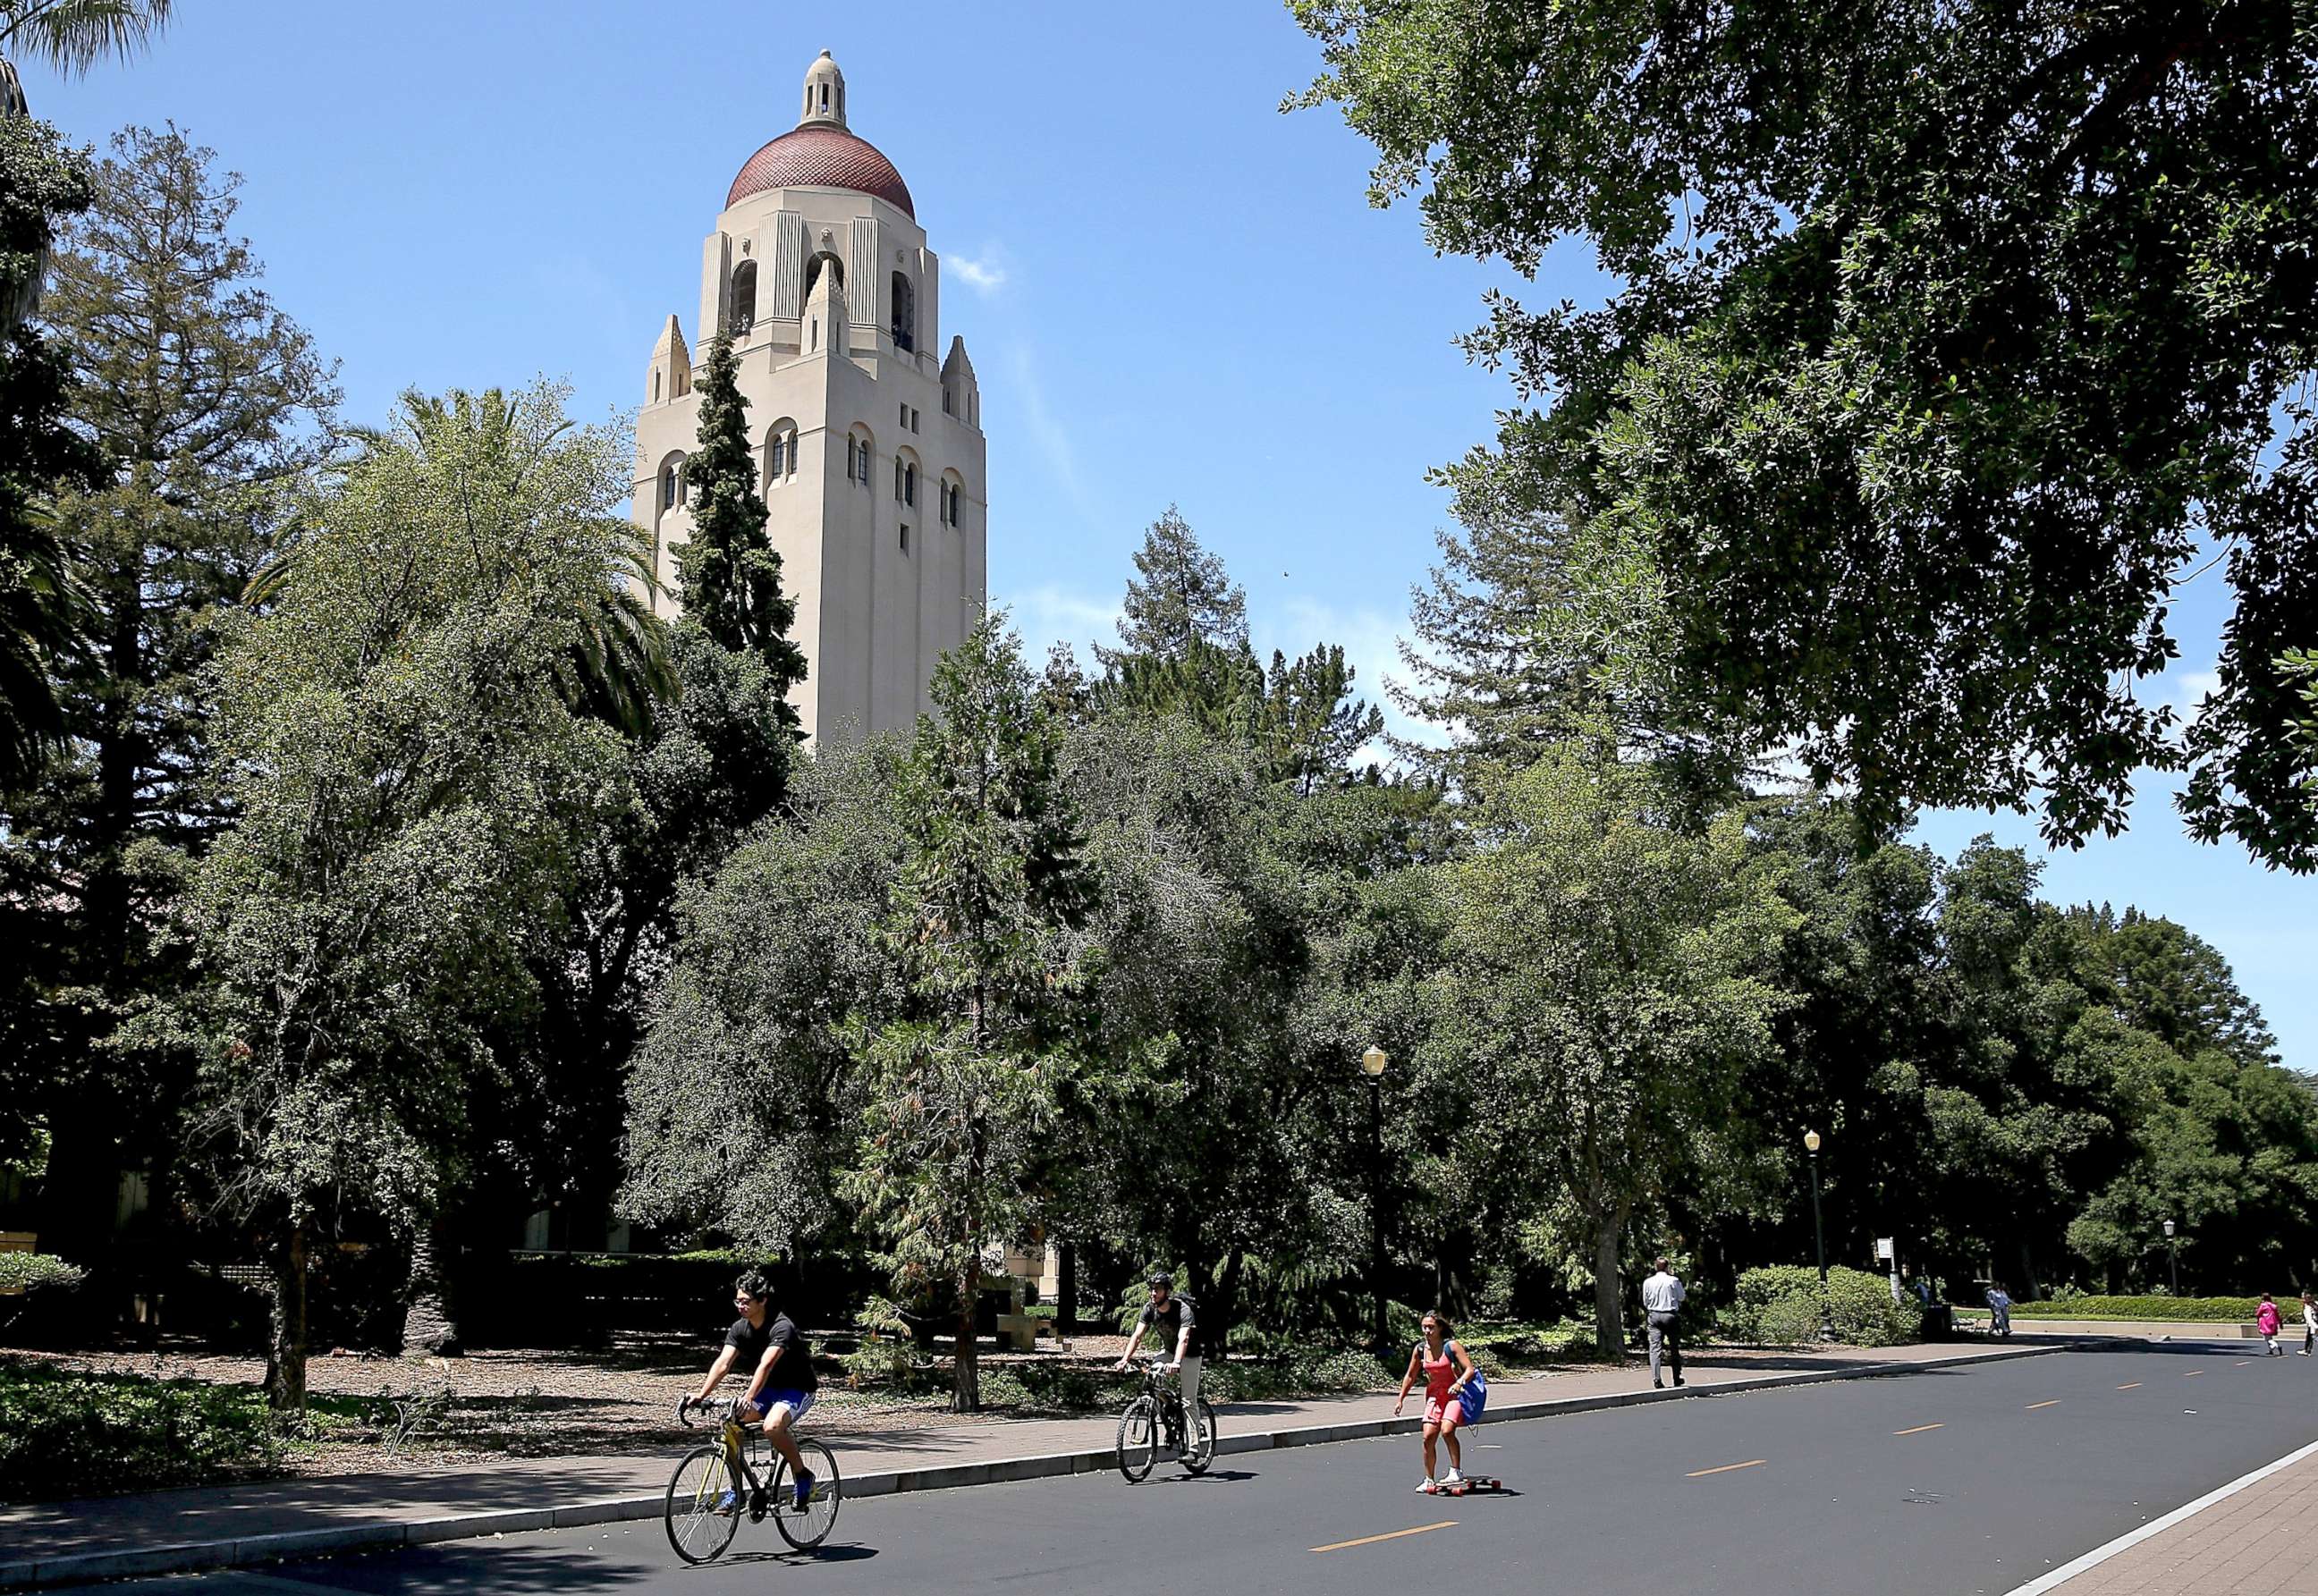 PHOTO: People ride bikes past Hoover Tower on the Stanford University campus on May 22, 2014 in Stanford, Calif.